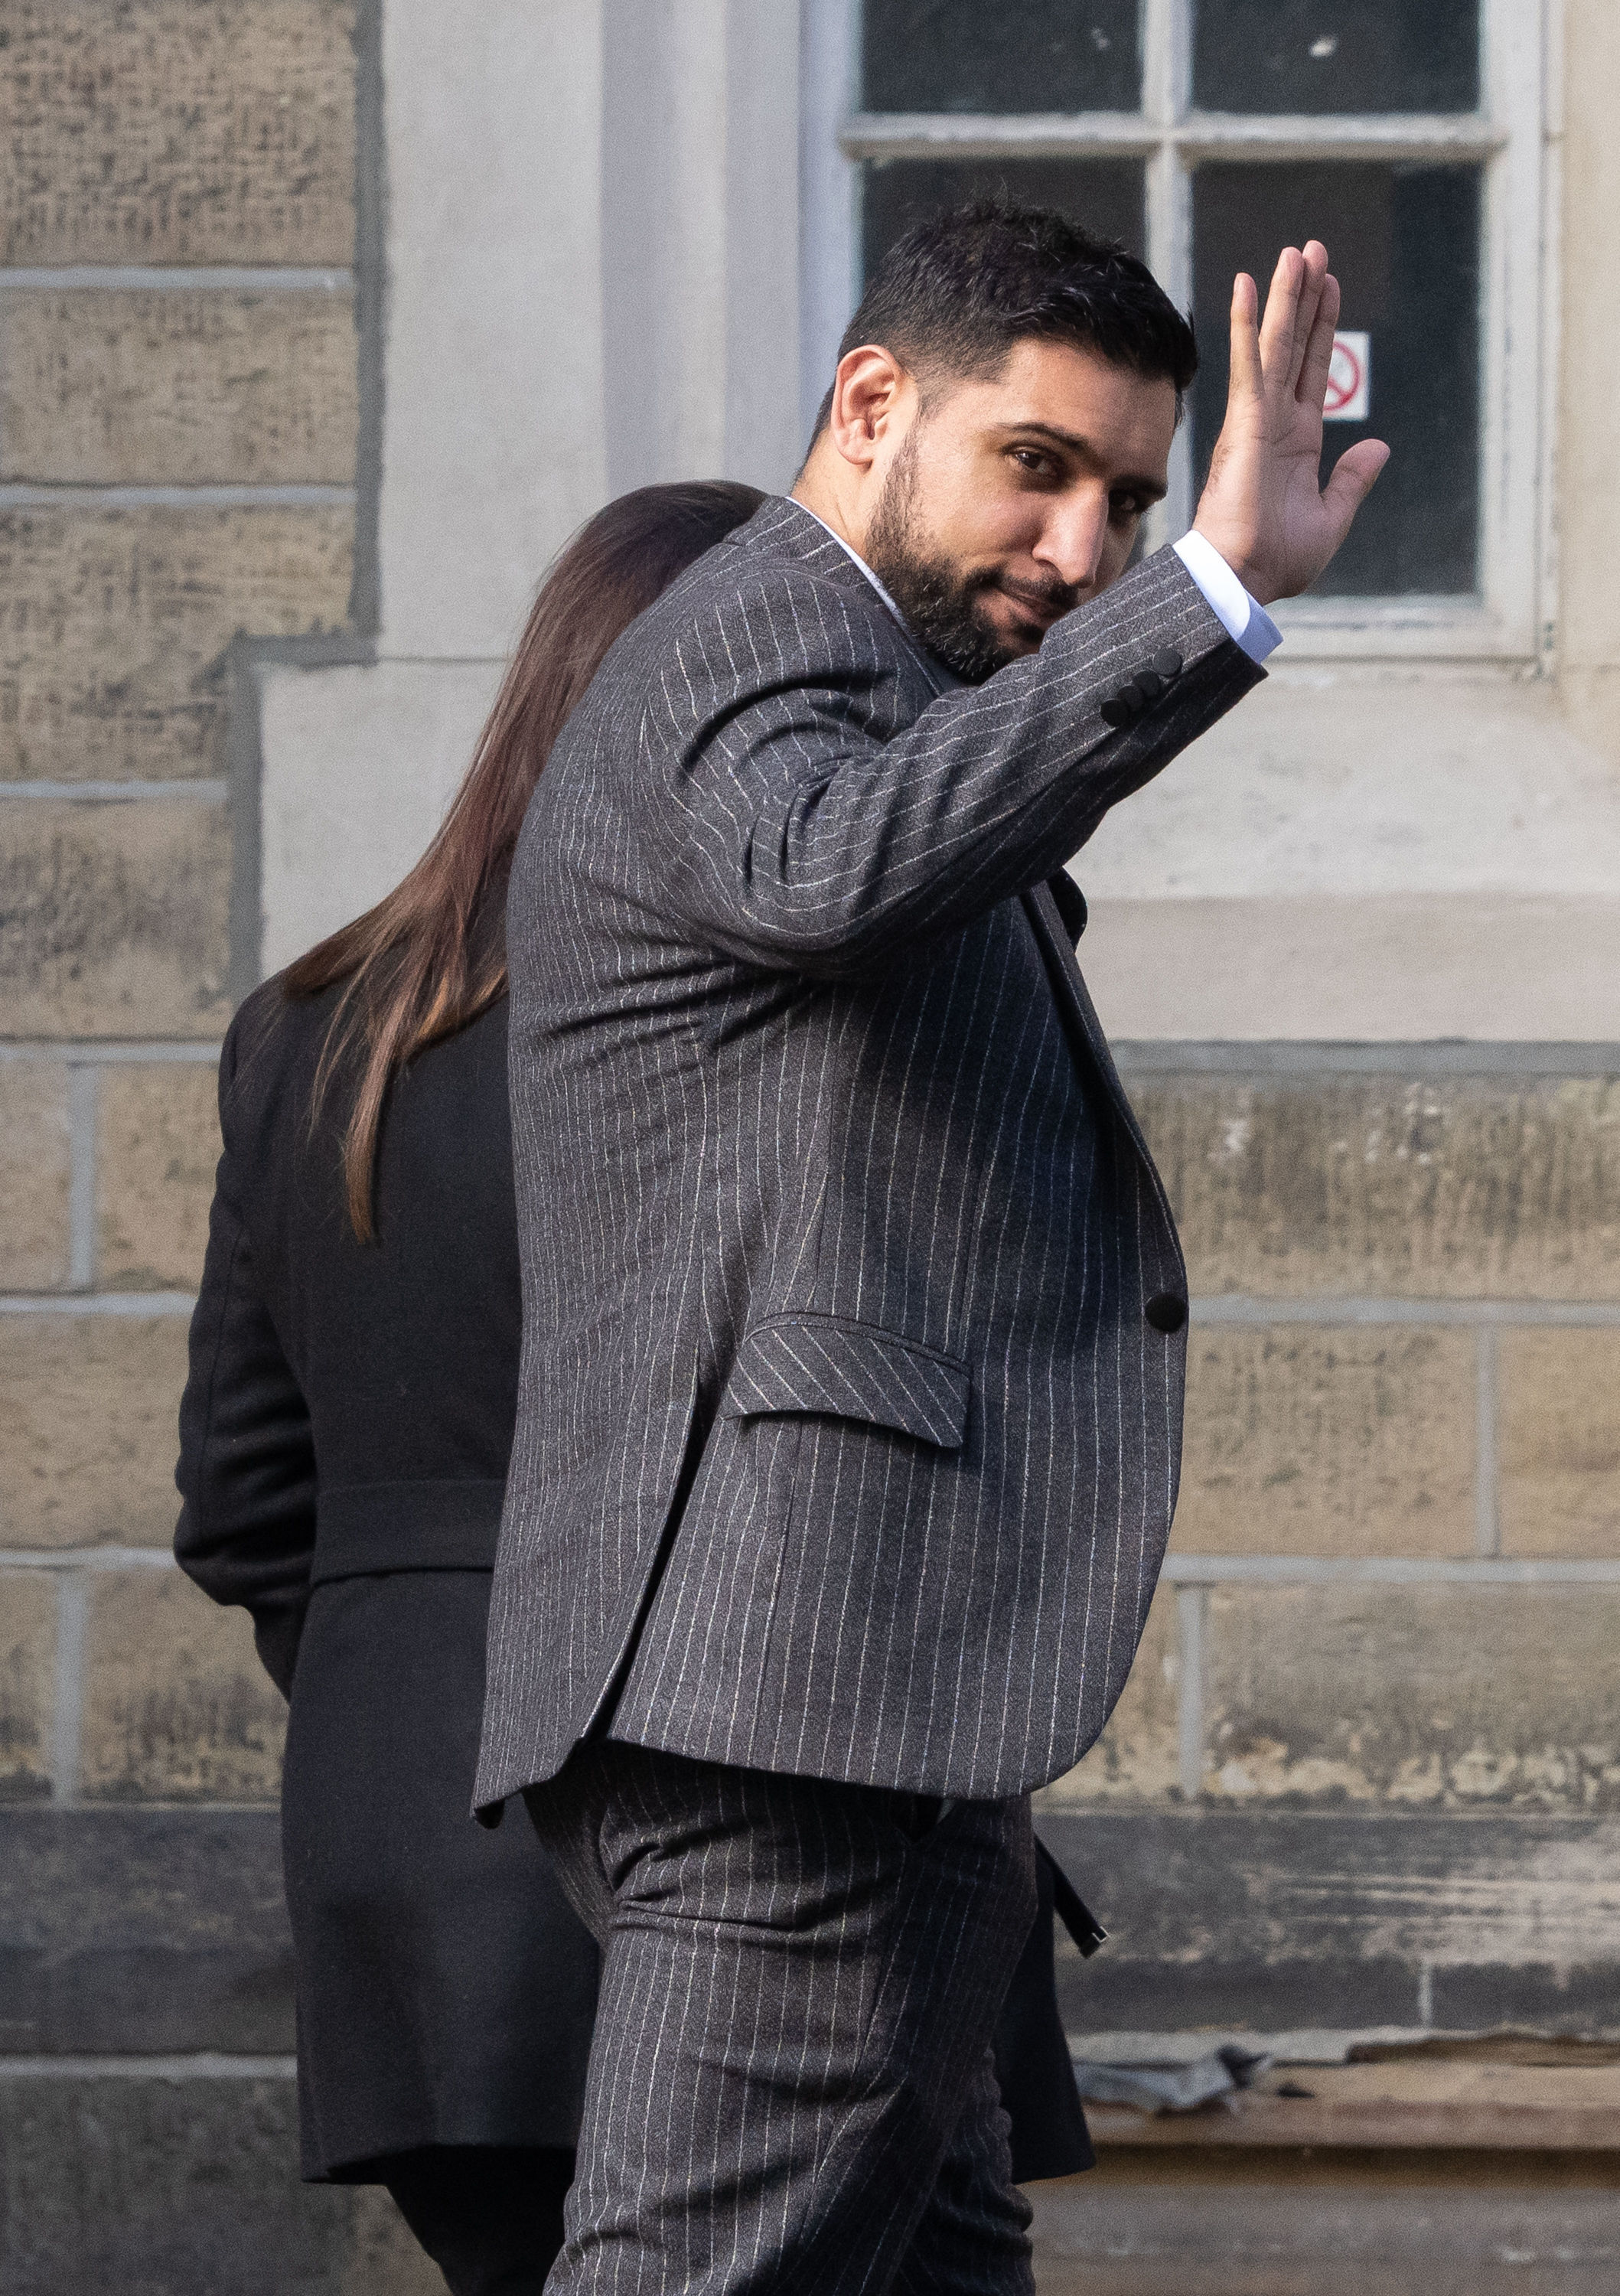 Former world boxing champion Amir Khan, waves as he arrives at Snaresbrook Crown Court, in east London, where three men are accused of robbing the boxer of a diamond watch at gunpoint. Khans 72,000 custom-made Franck Muller watch was stolen in High